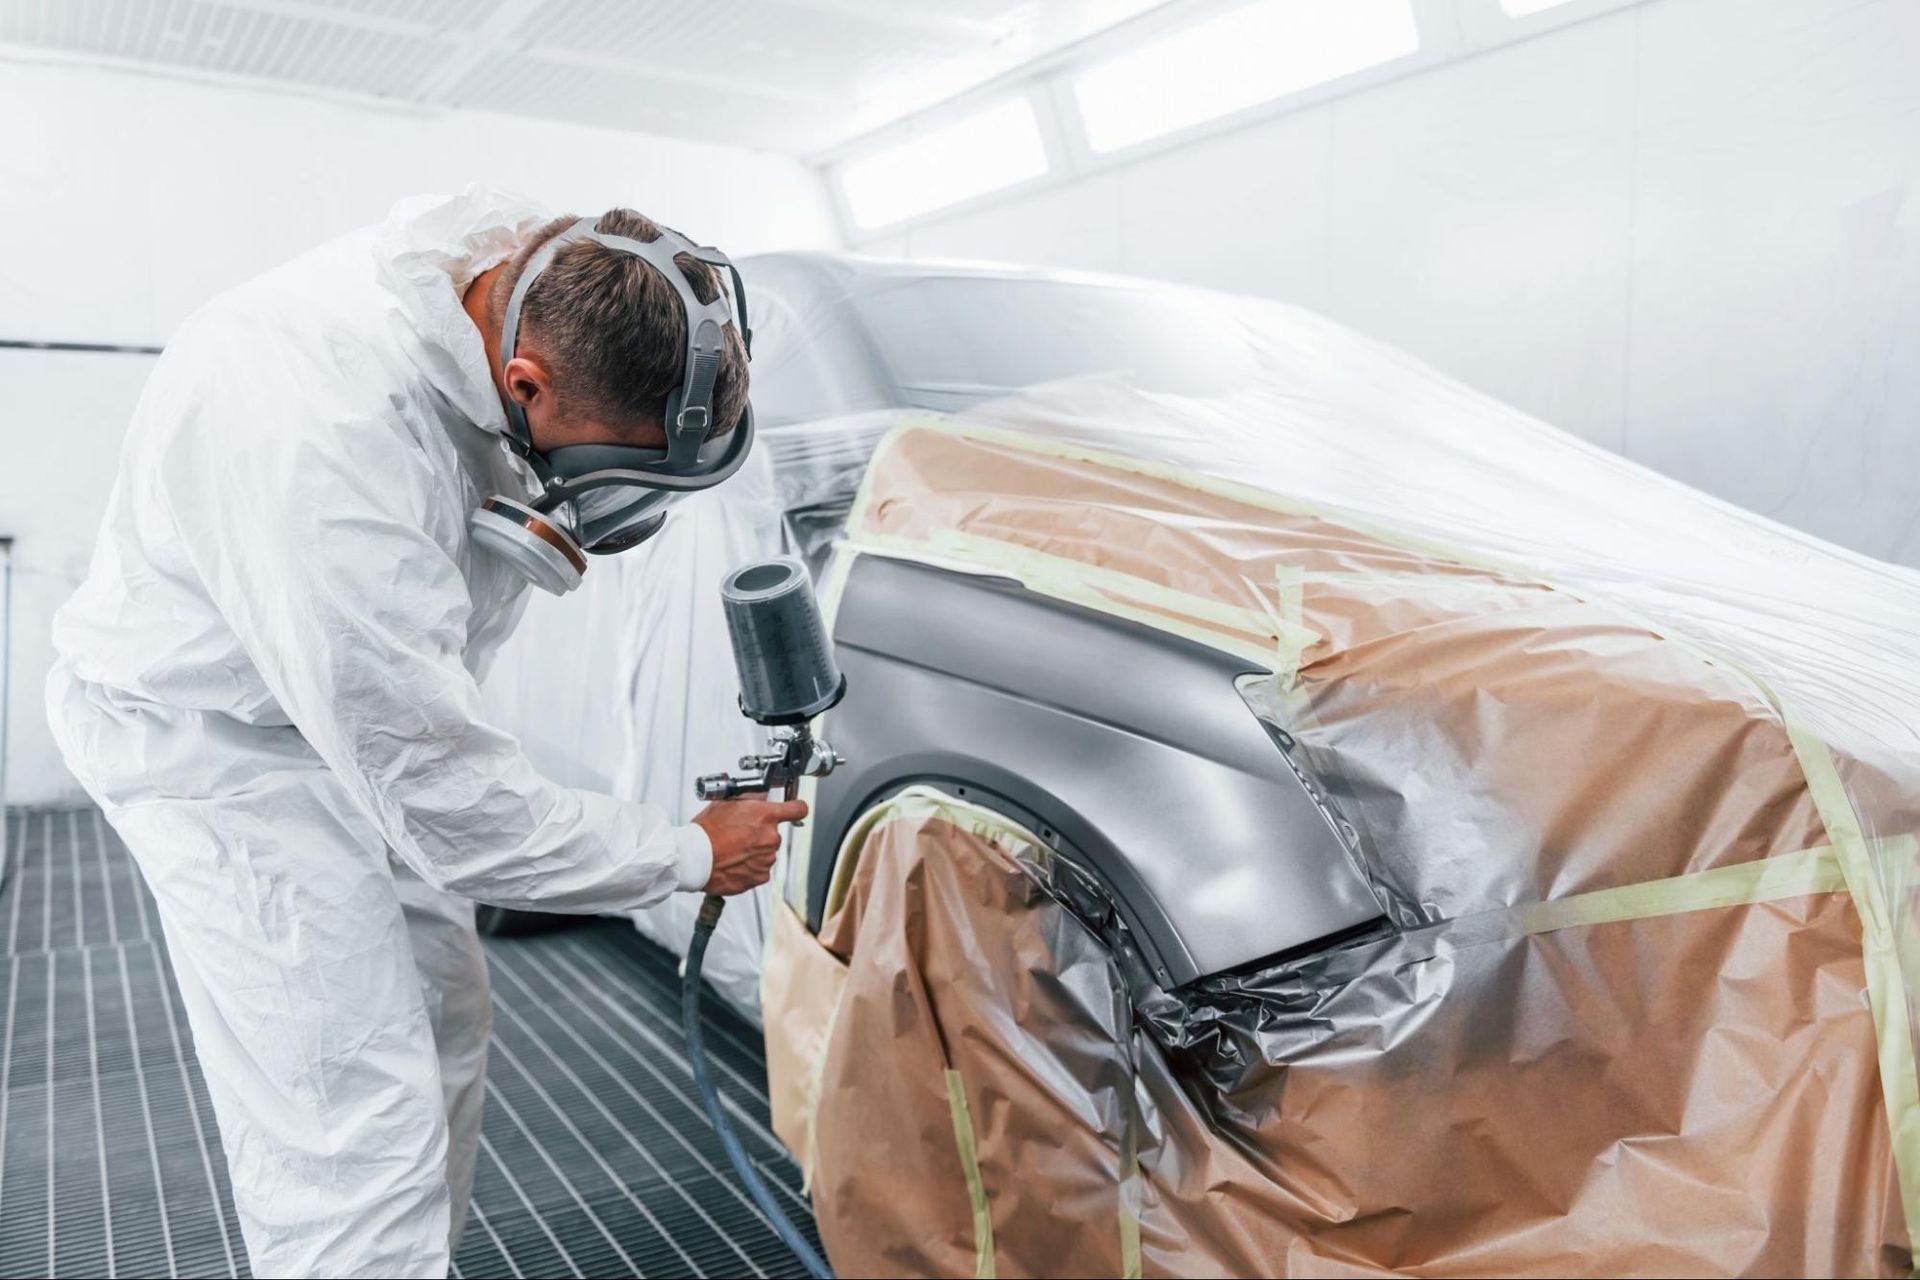 a man is painting a car in a paint booth .